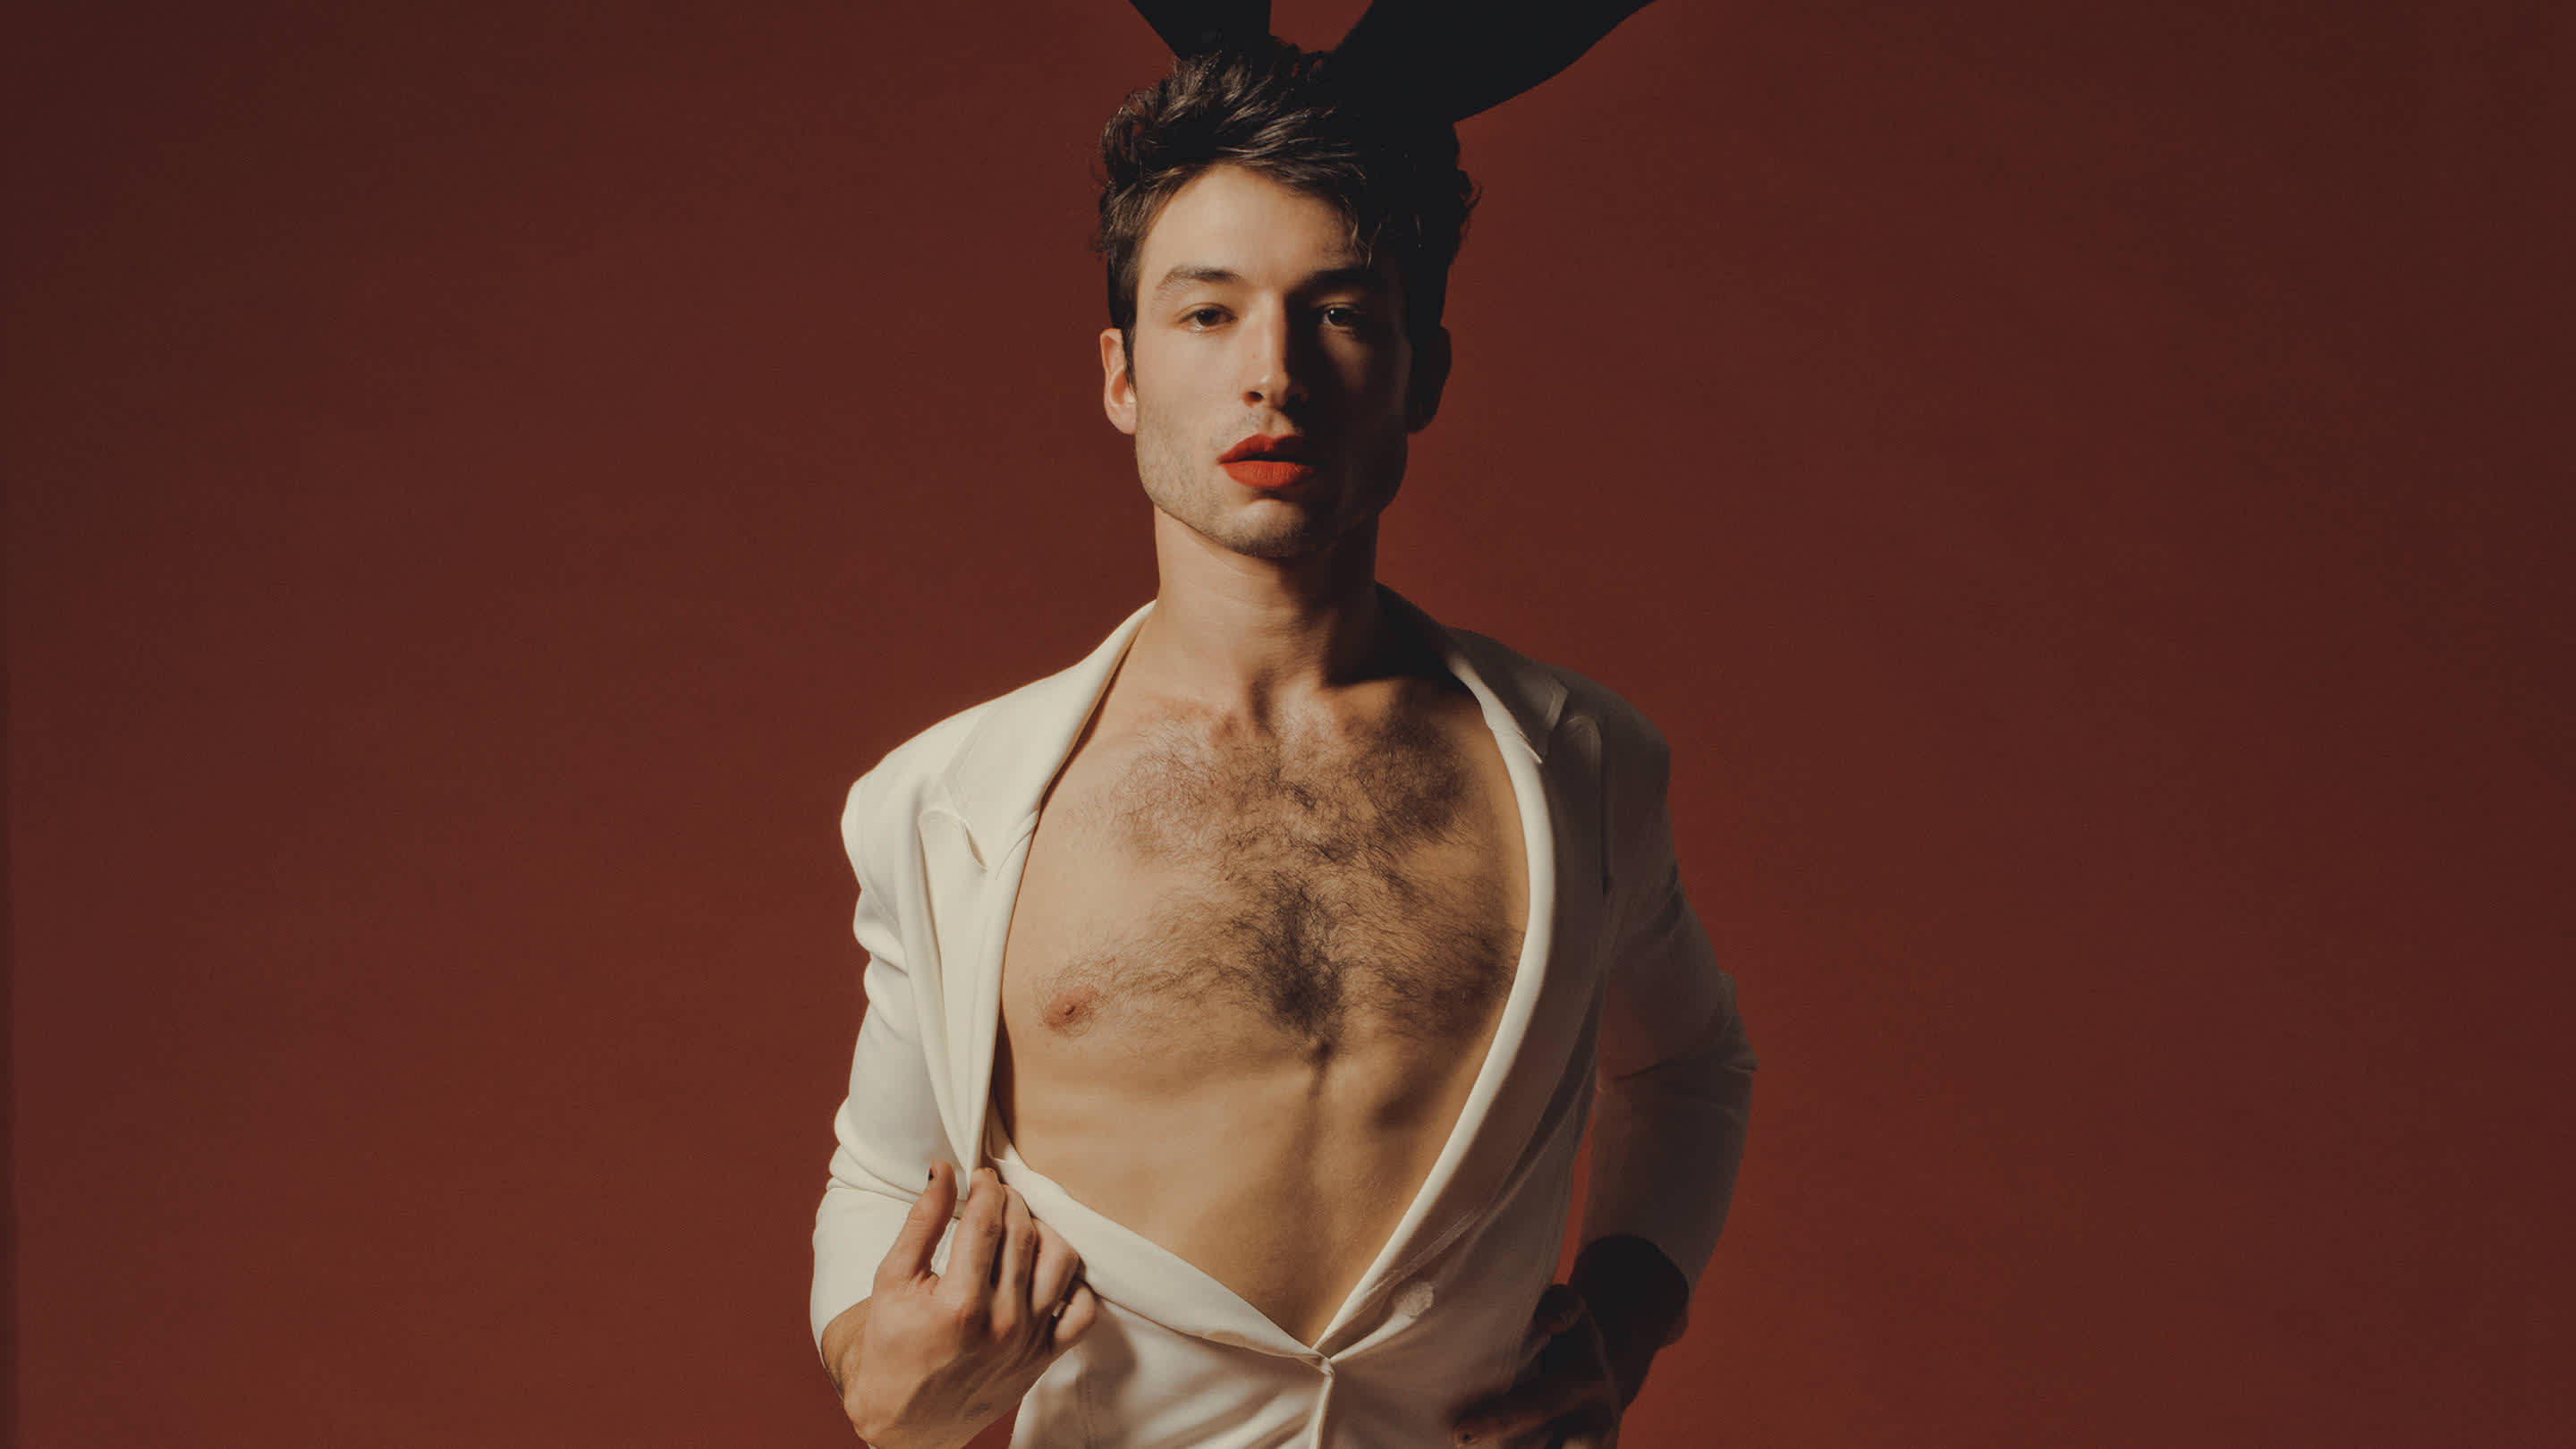 Harry Potter Porn Playboy - Ezra Miller Poses for Playboy, Talks Suicide and Polyamory